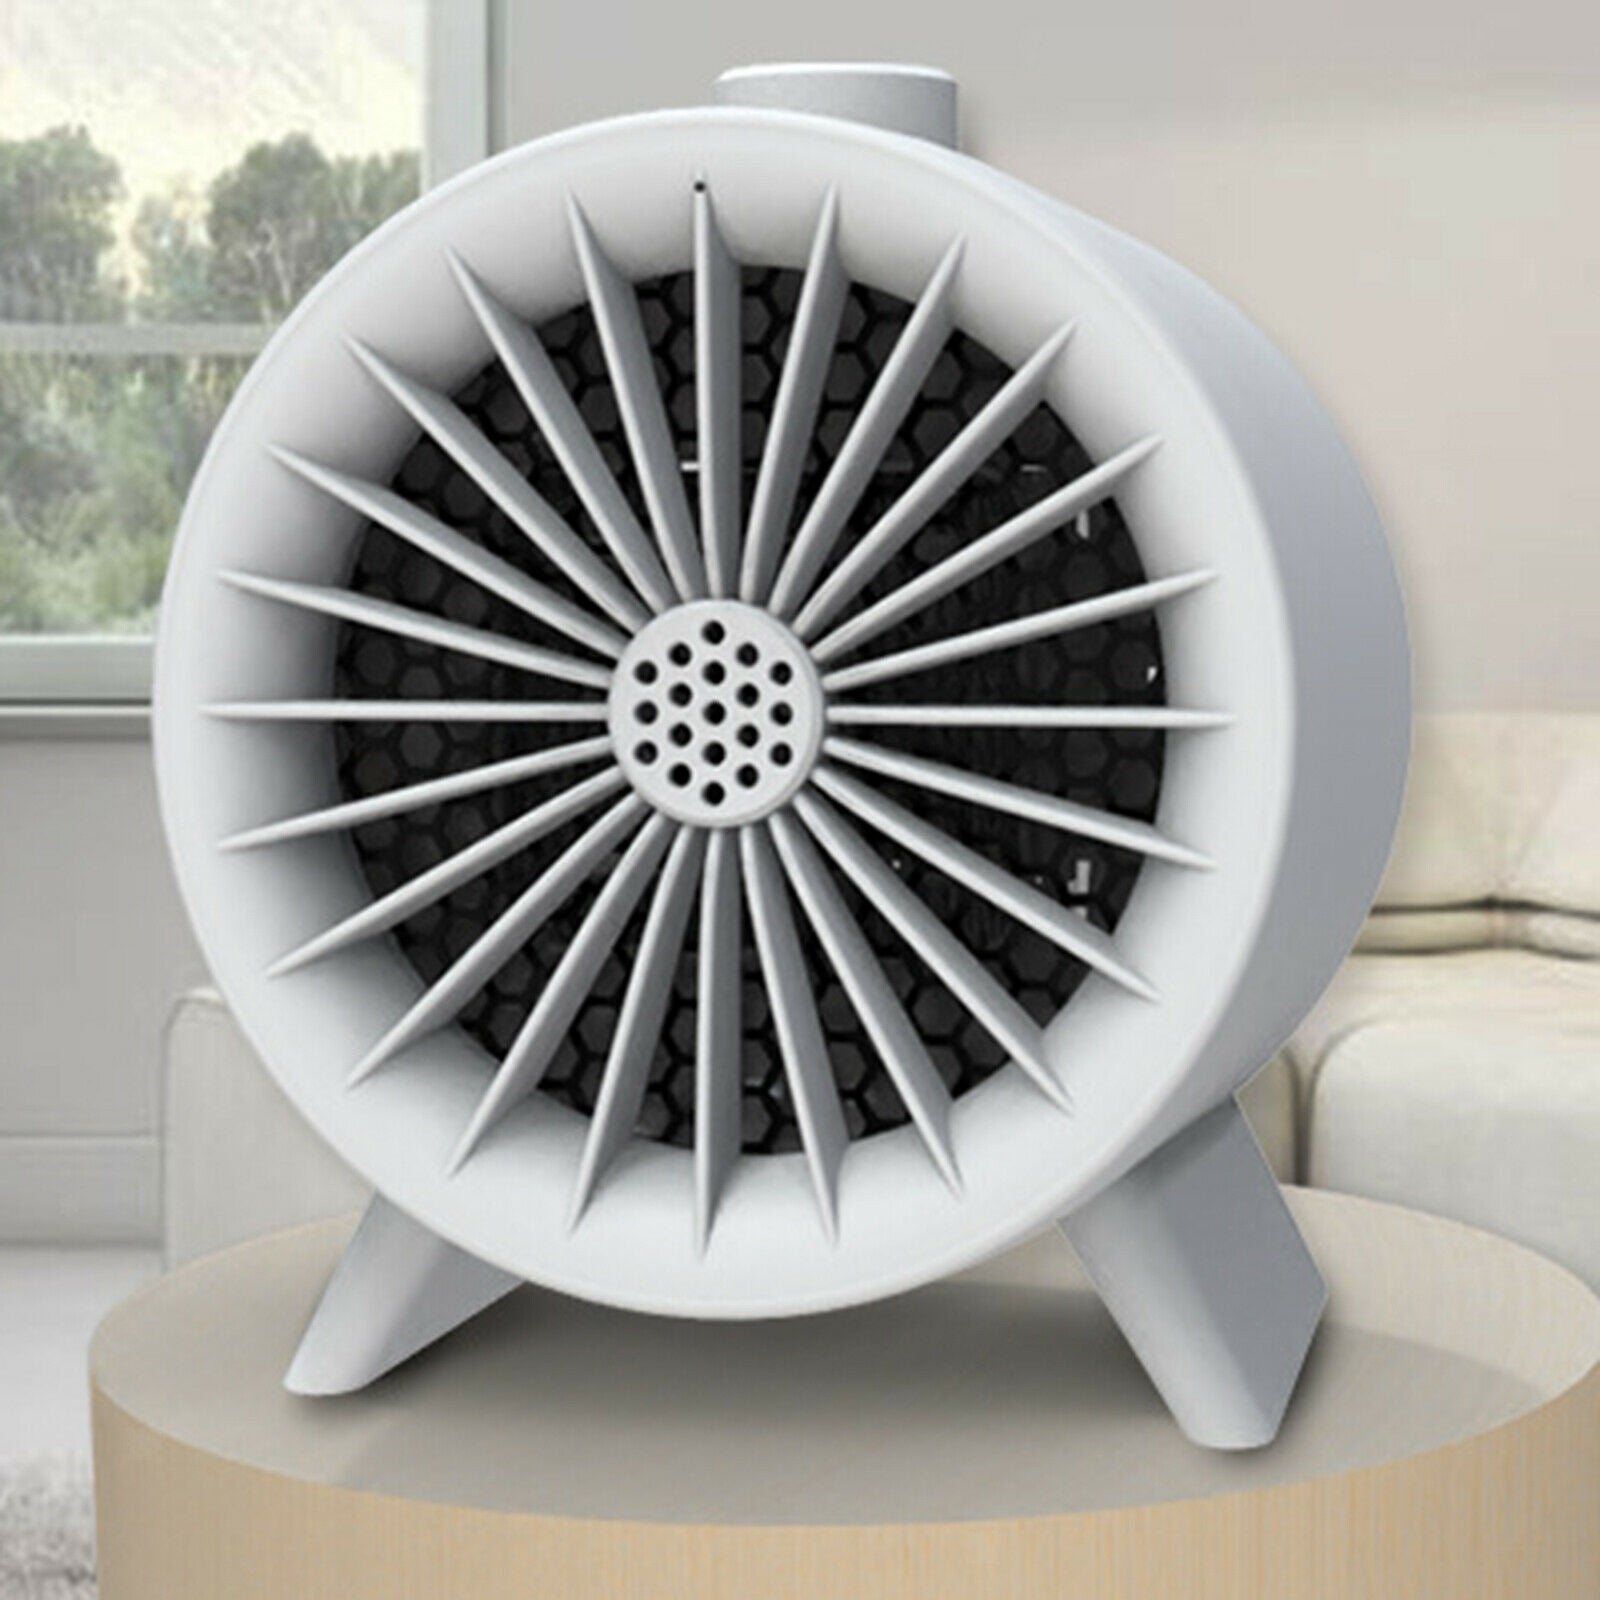 Portable Electric Space Heater Adjustable Personal Fan Thermostat Desk Decor